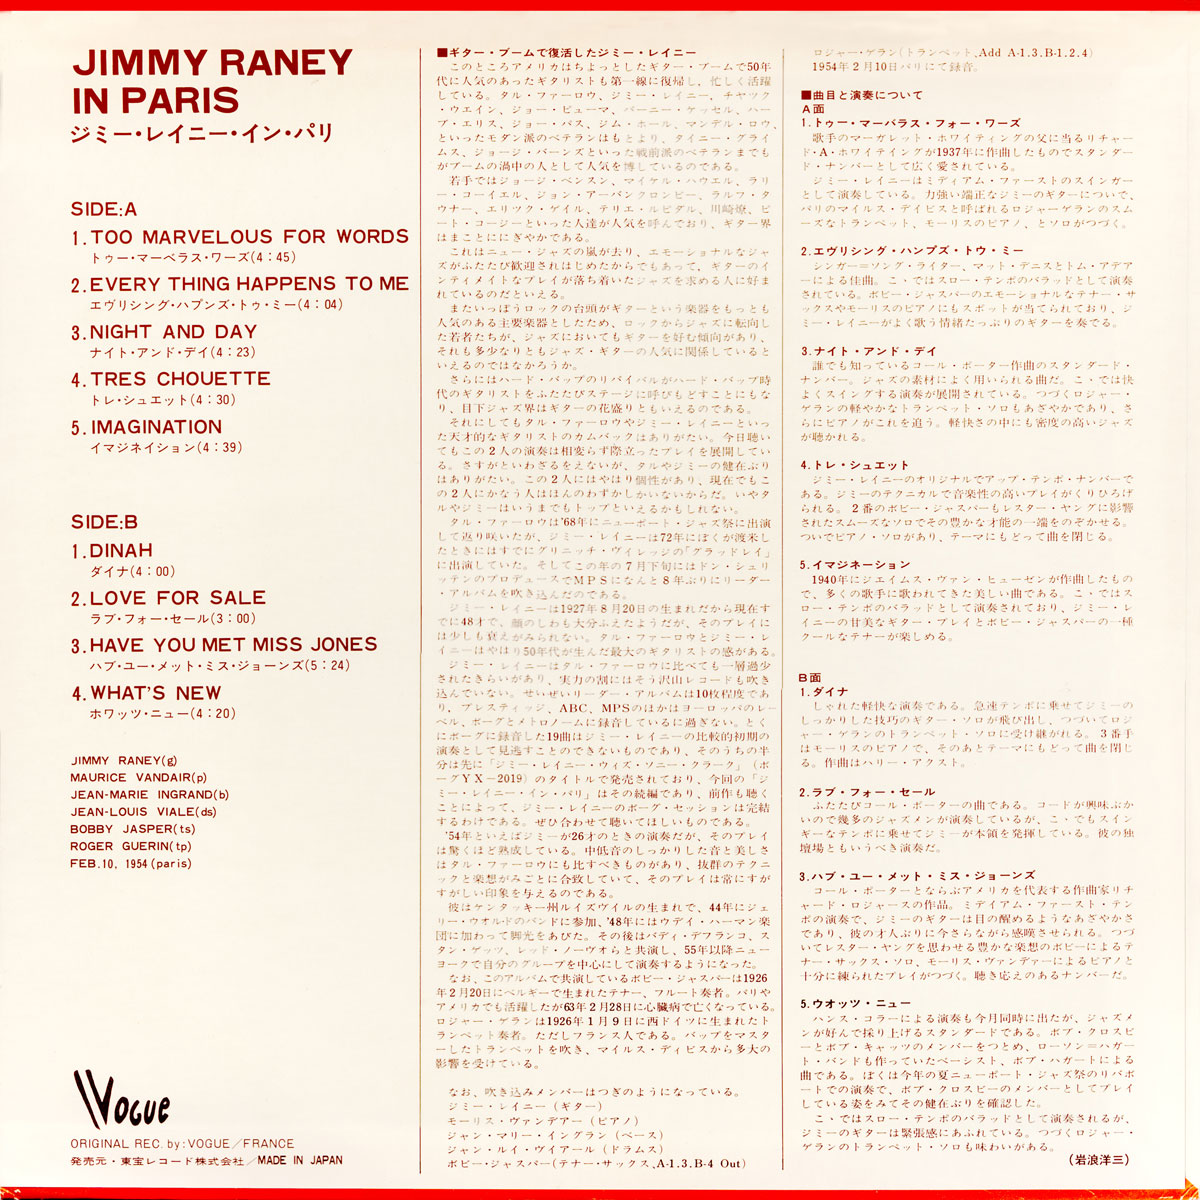 Jimmy Raney in Paris - Back cover